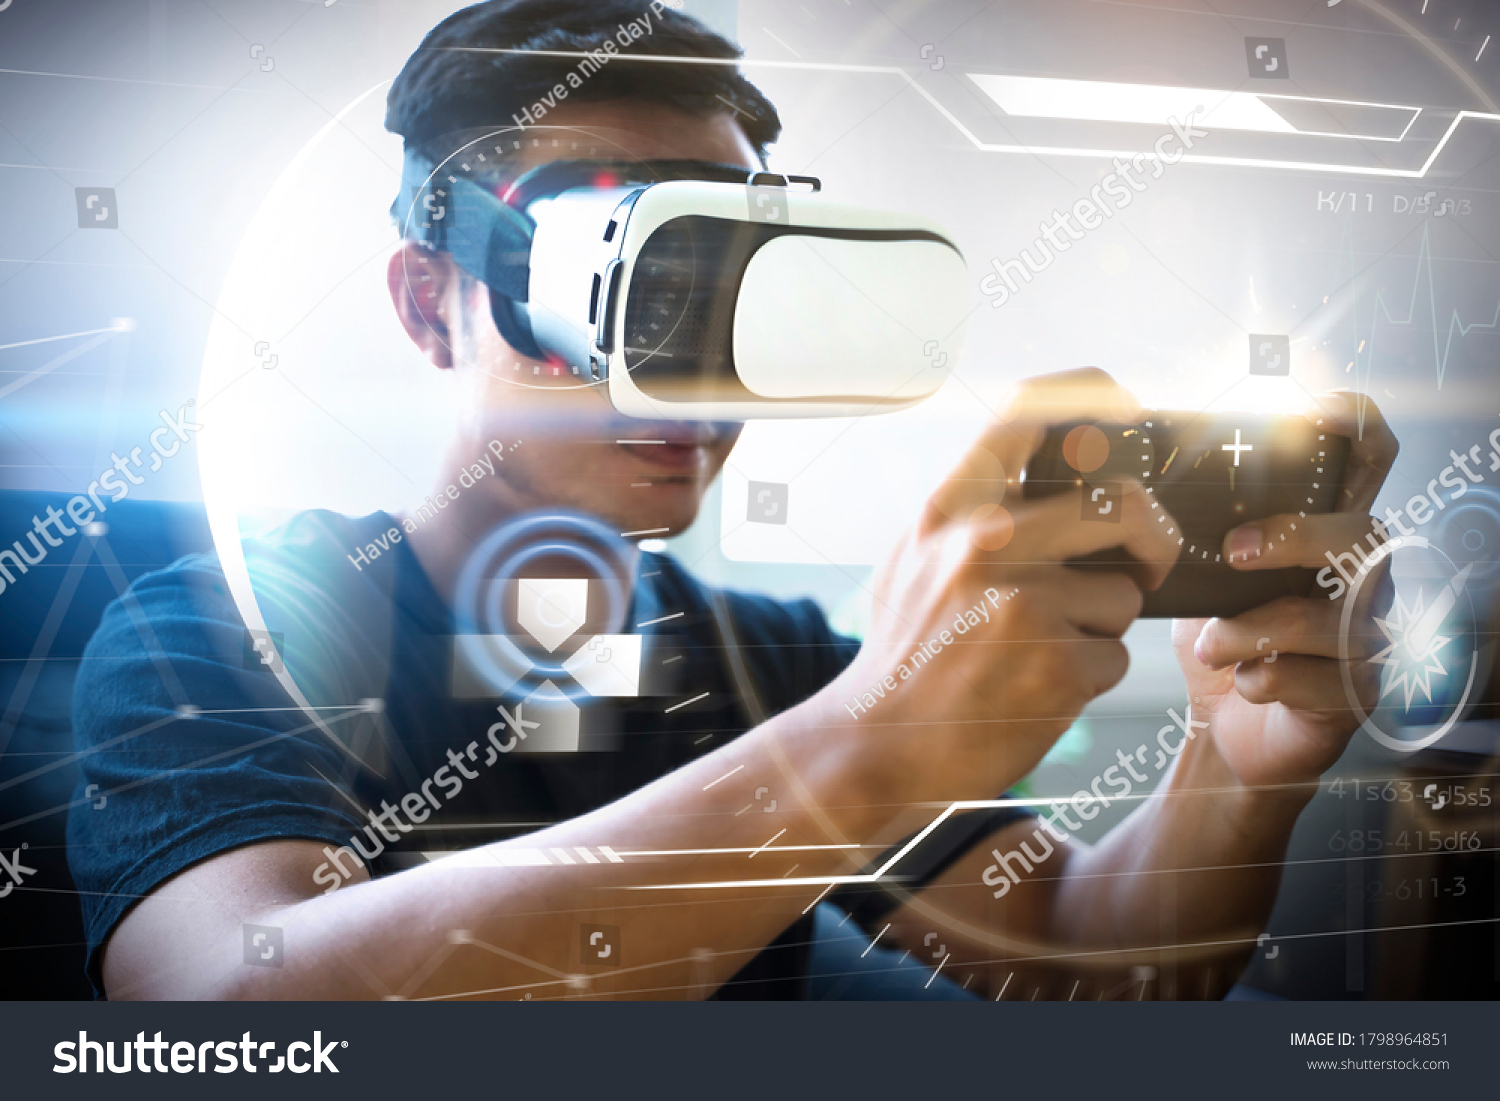 Futuristic virtual reality VR headset technology playing video games using mobile phone device shooting user interface, Asian man sitting on sofa free time enjoinment having fun at home living room #1798964851